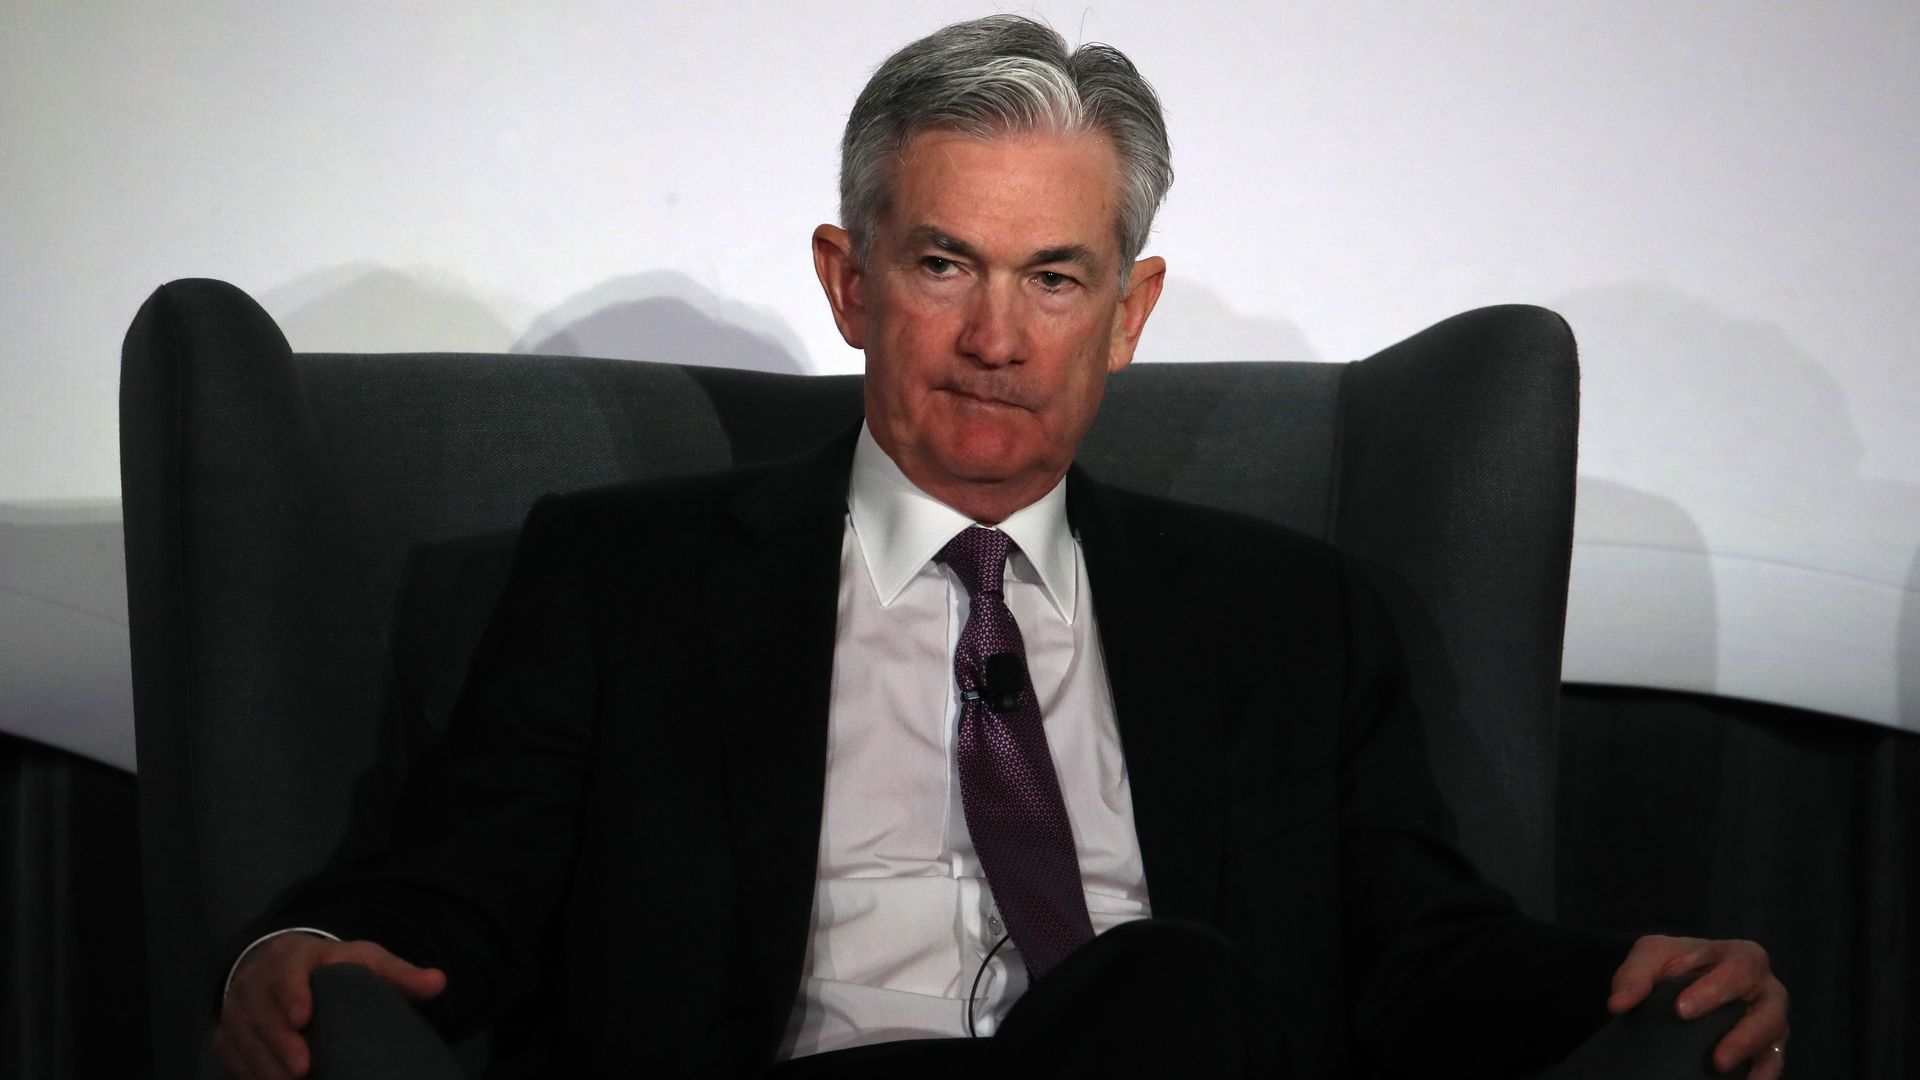 Chairman of the Federal Reserve Jerome Powell sitting in a chair